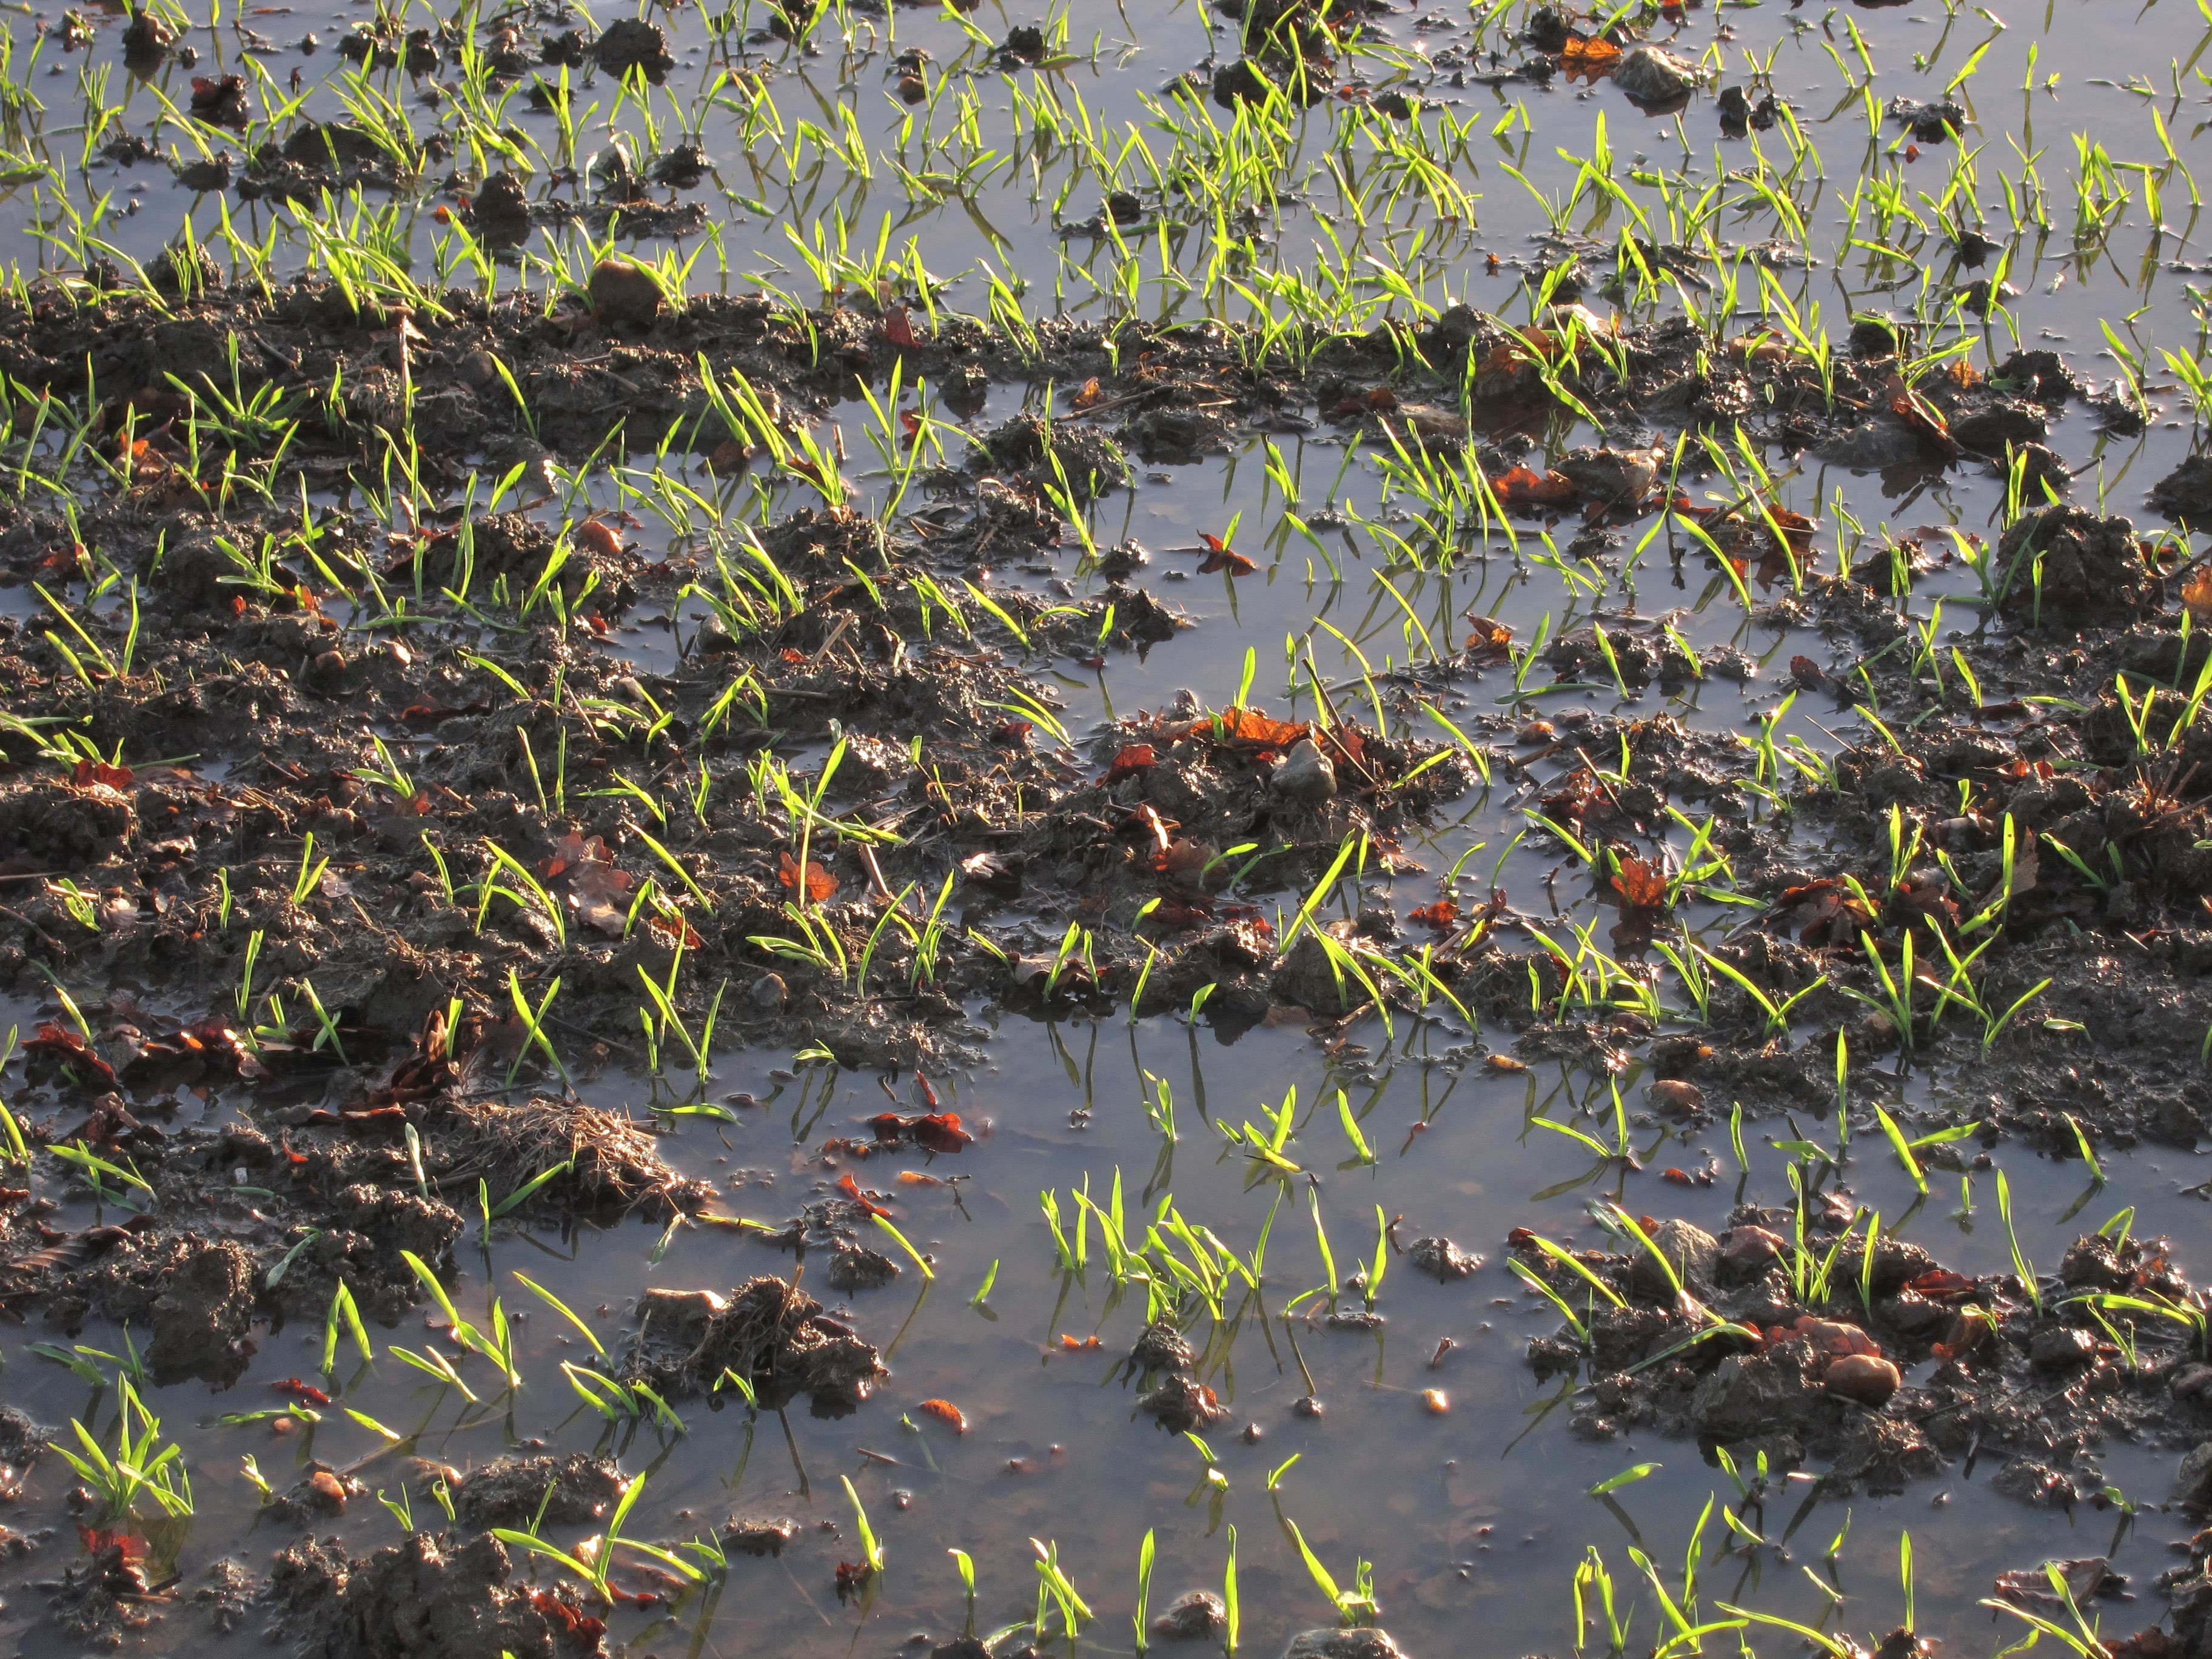 a flooded wheat field with some emerging wheat plants.